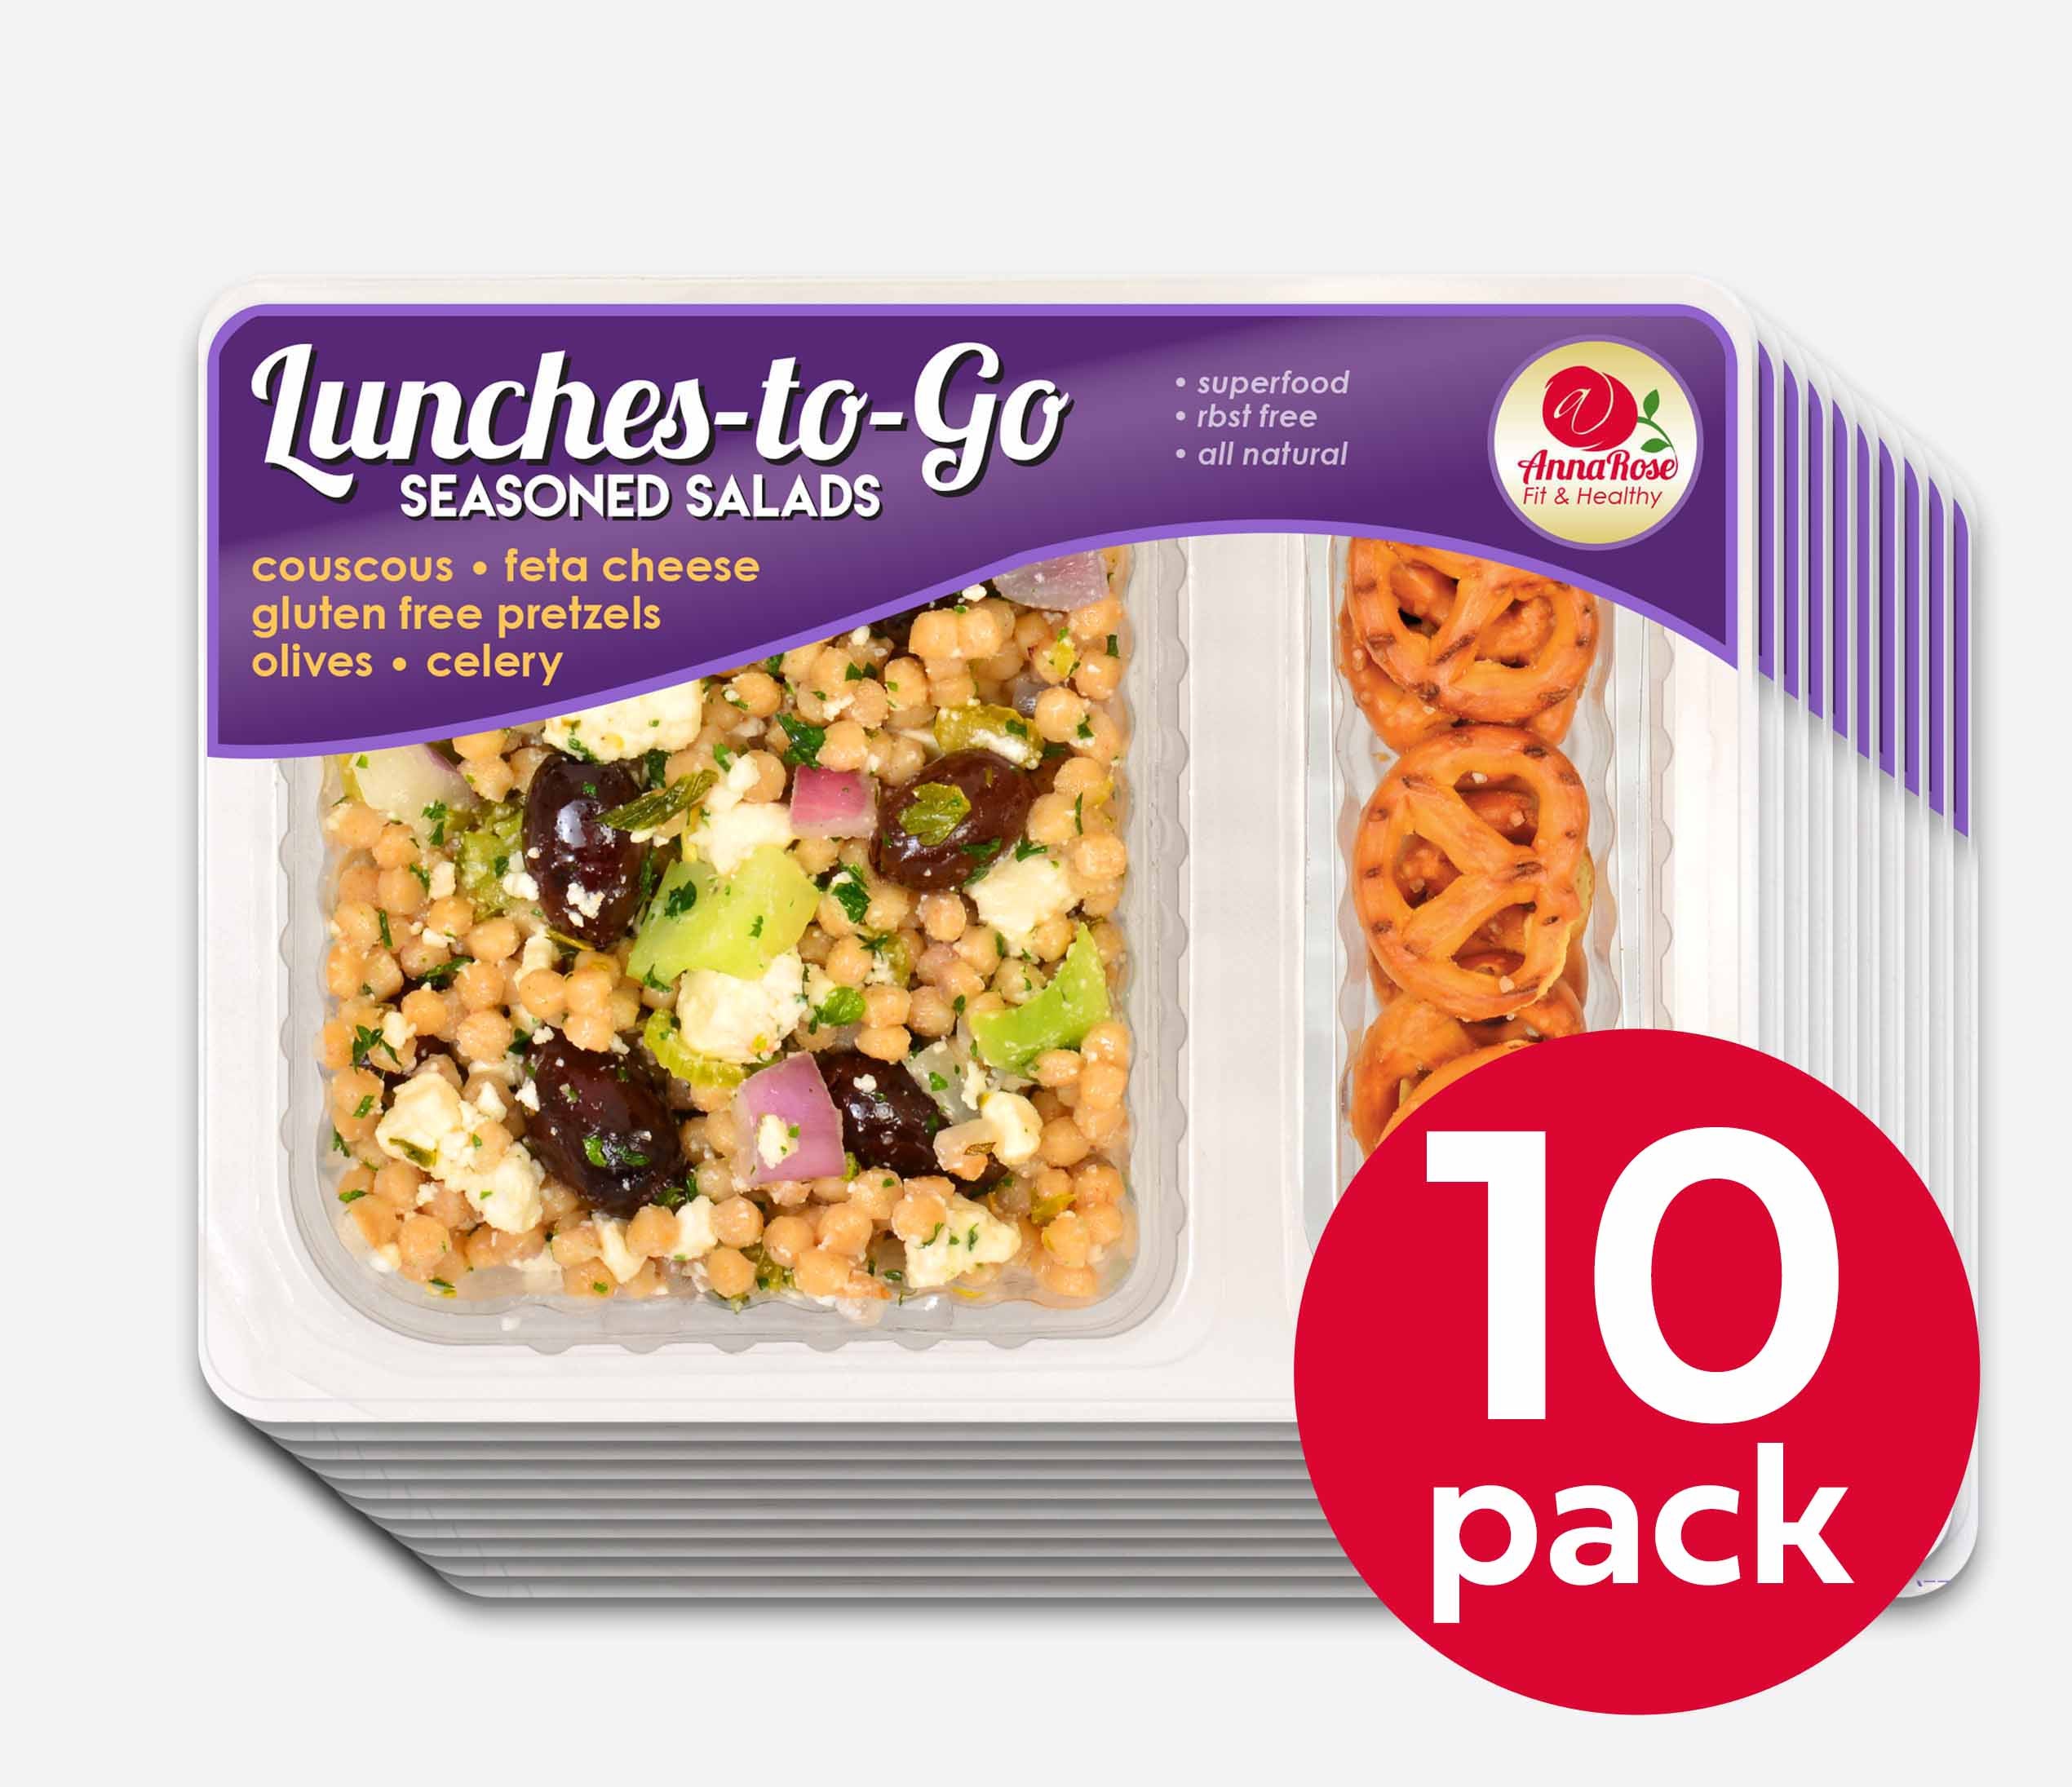 Lunches to Go 10 pack